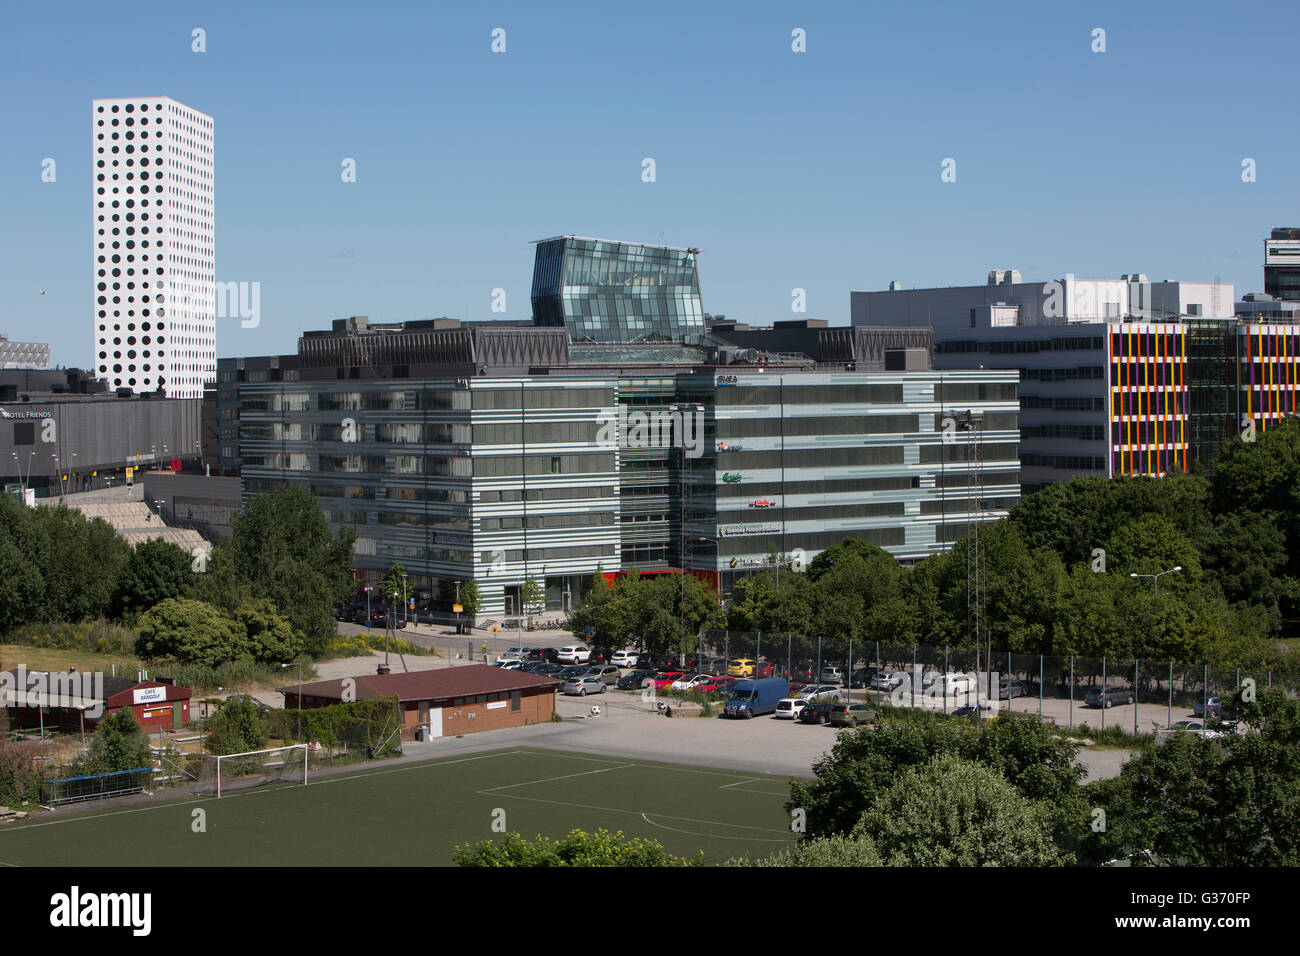 View of Solna. Mall of Scandinavia and Friends Arena. Stock Photo